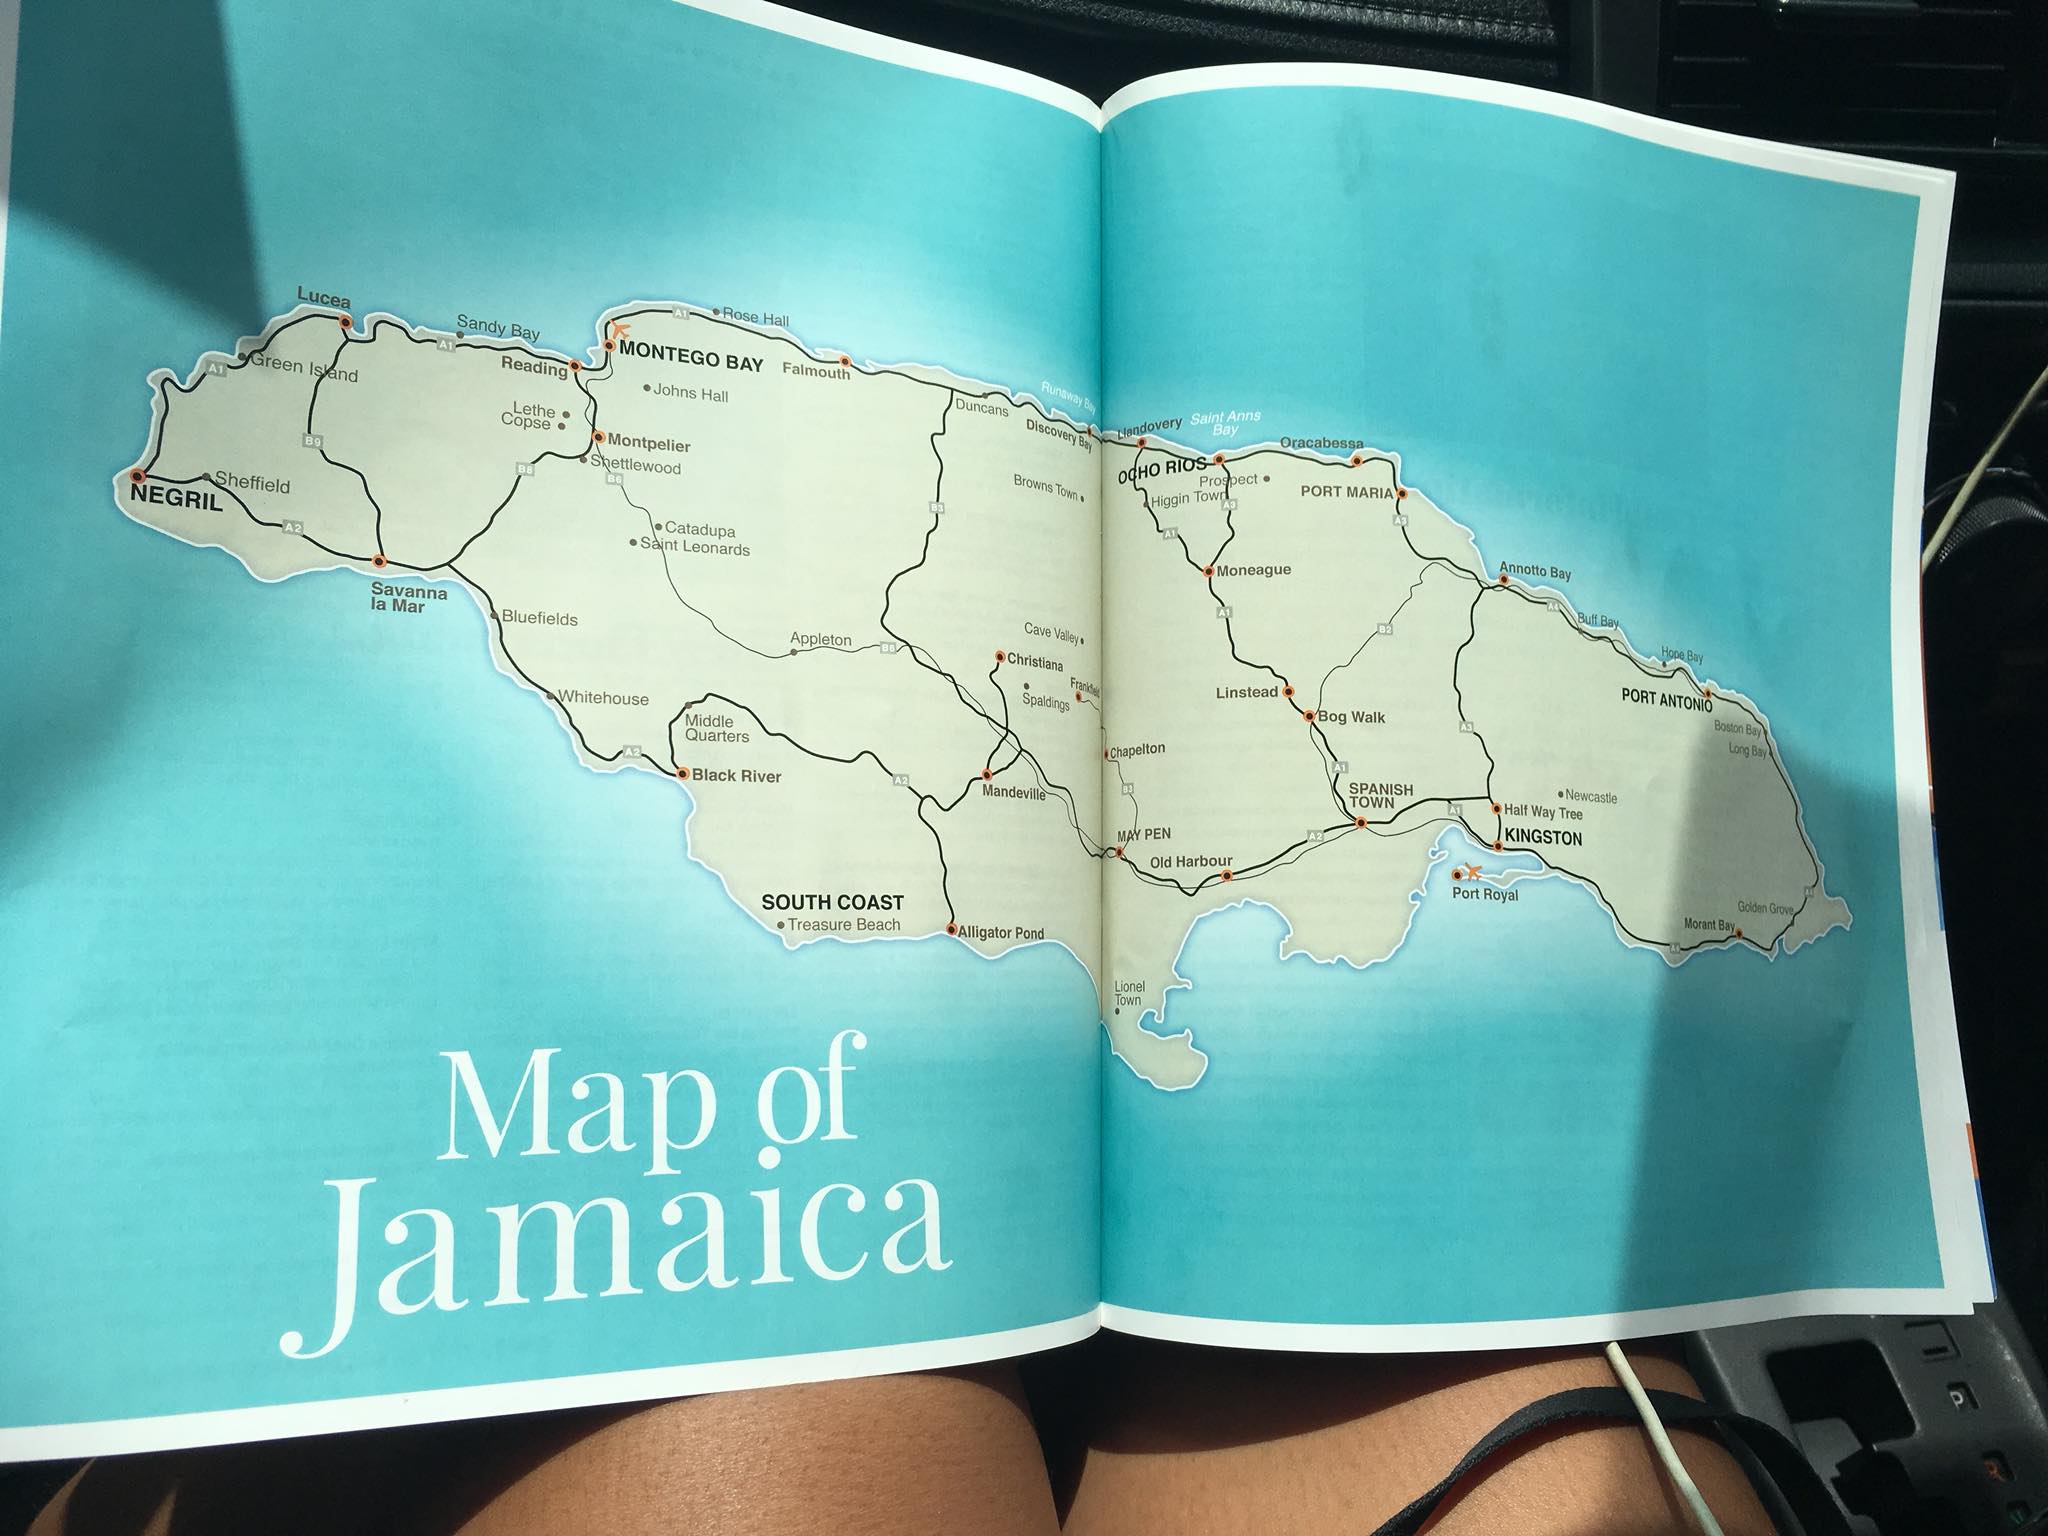 Sailing Life Day 79 - 83: First Time Trip to Jamaica